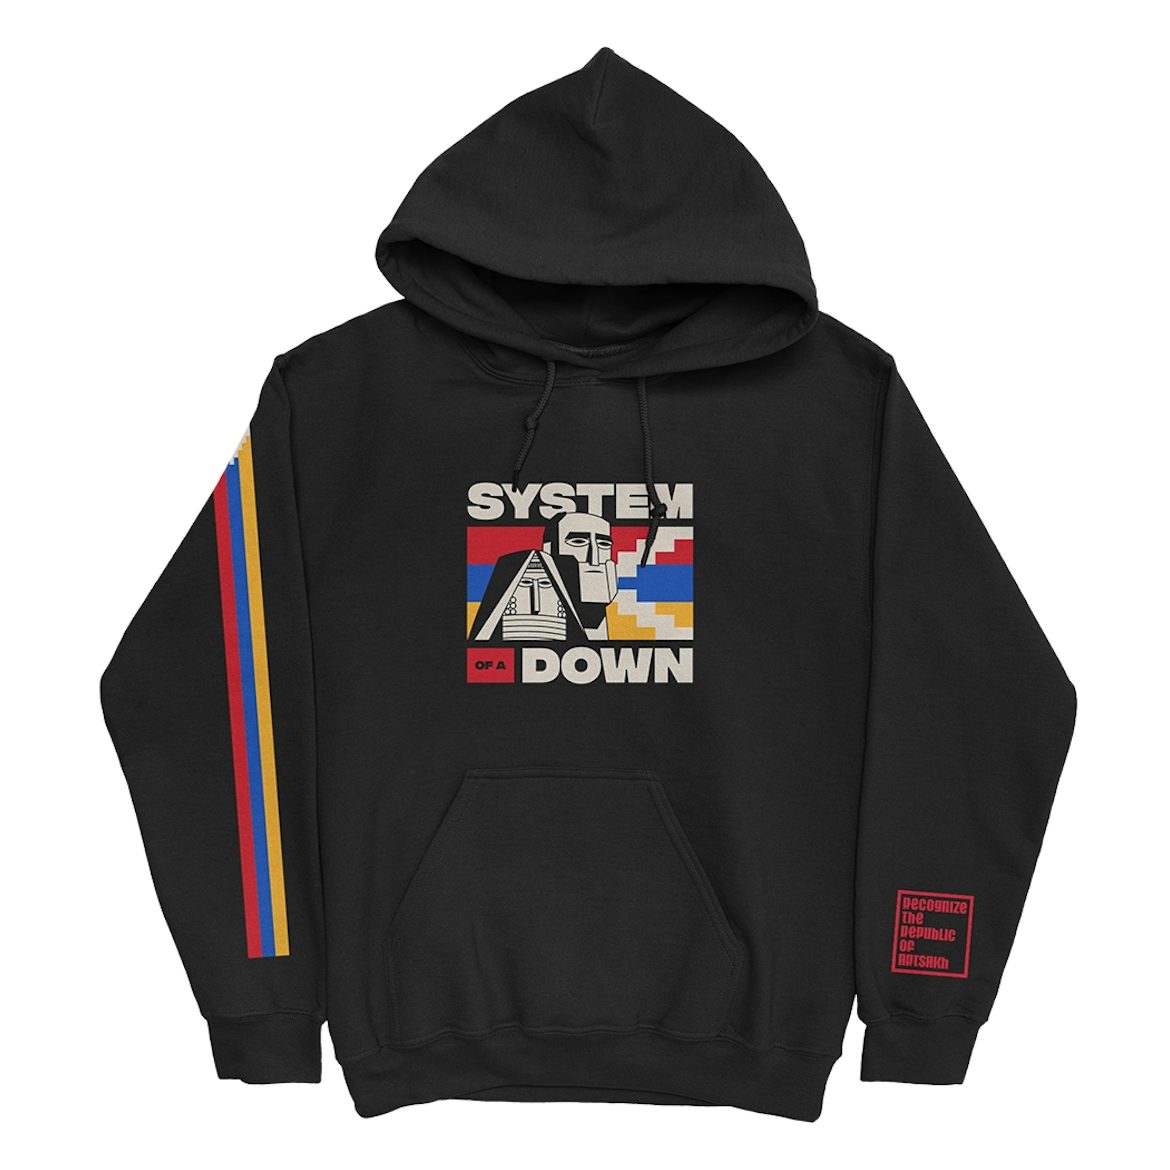 System Of A Down Store: Official Merch & Vinyl